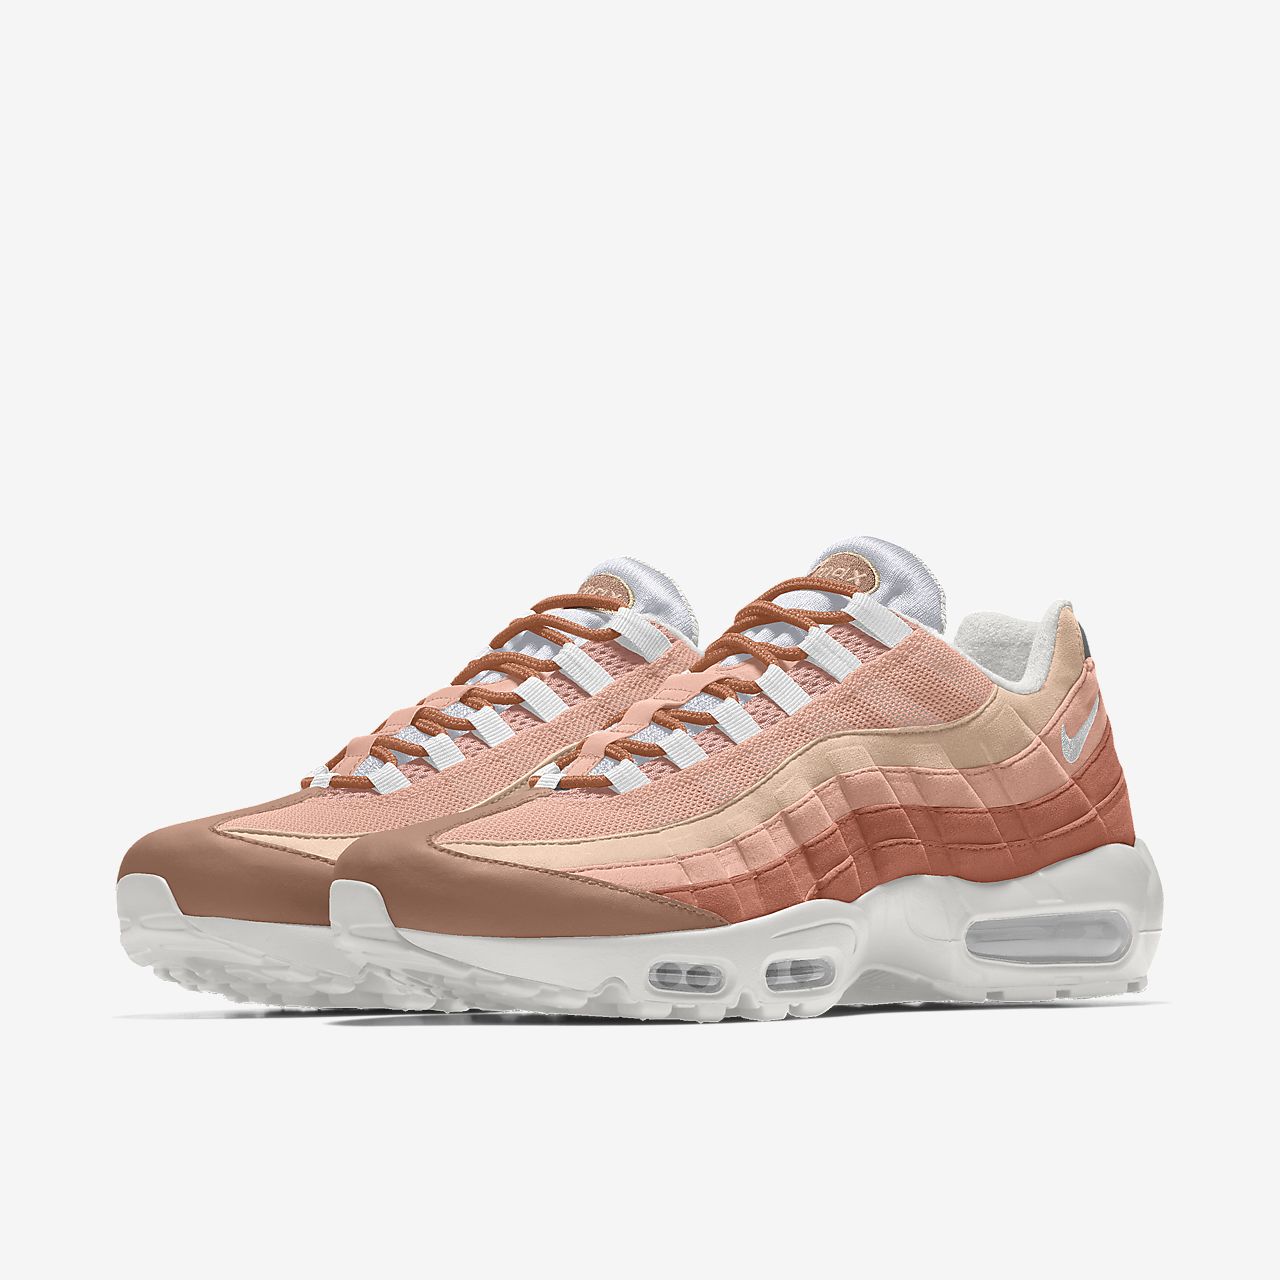 nike air max 95 cyber monday